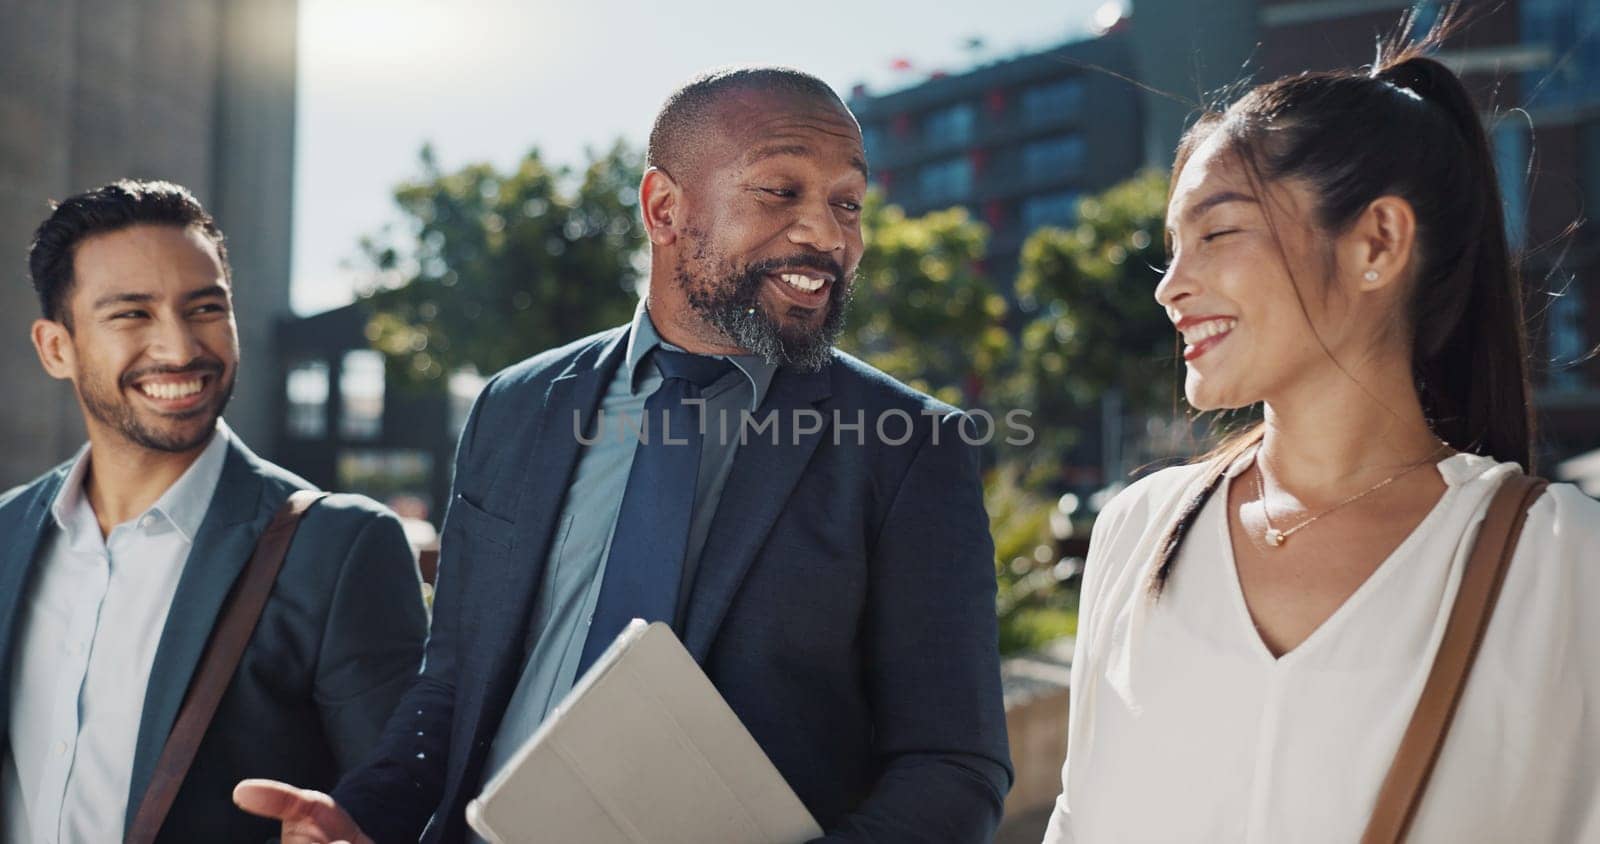 Business people, travel and group in city with discussion on morning commute, partnership and walking. Employees, man and woman with conversation, collaboration and networking outdoor in urban town by YuriArcurs